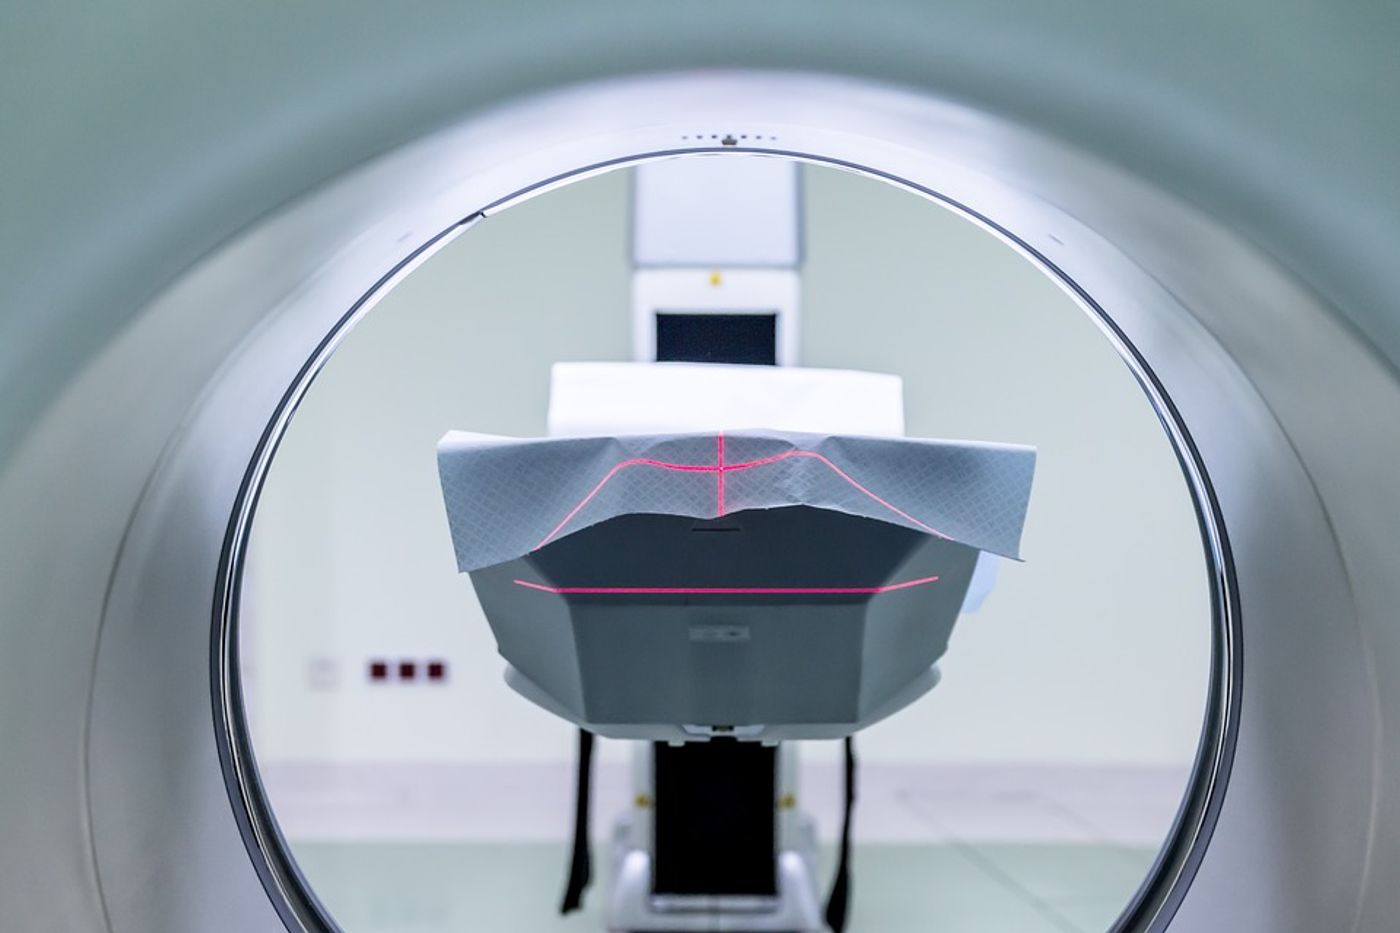 FLASH proton therapy proves to be effective in reducing the duration of radiation. Photo: Pixabay